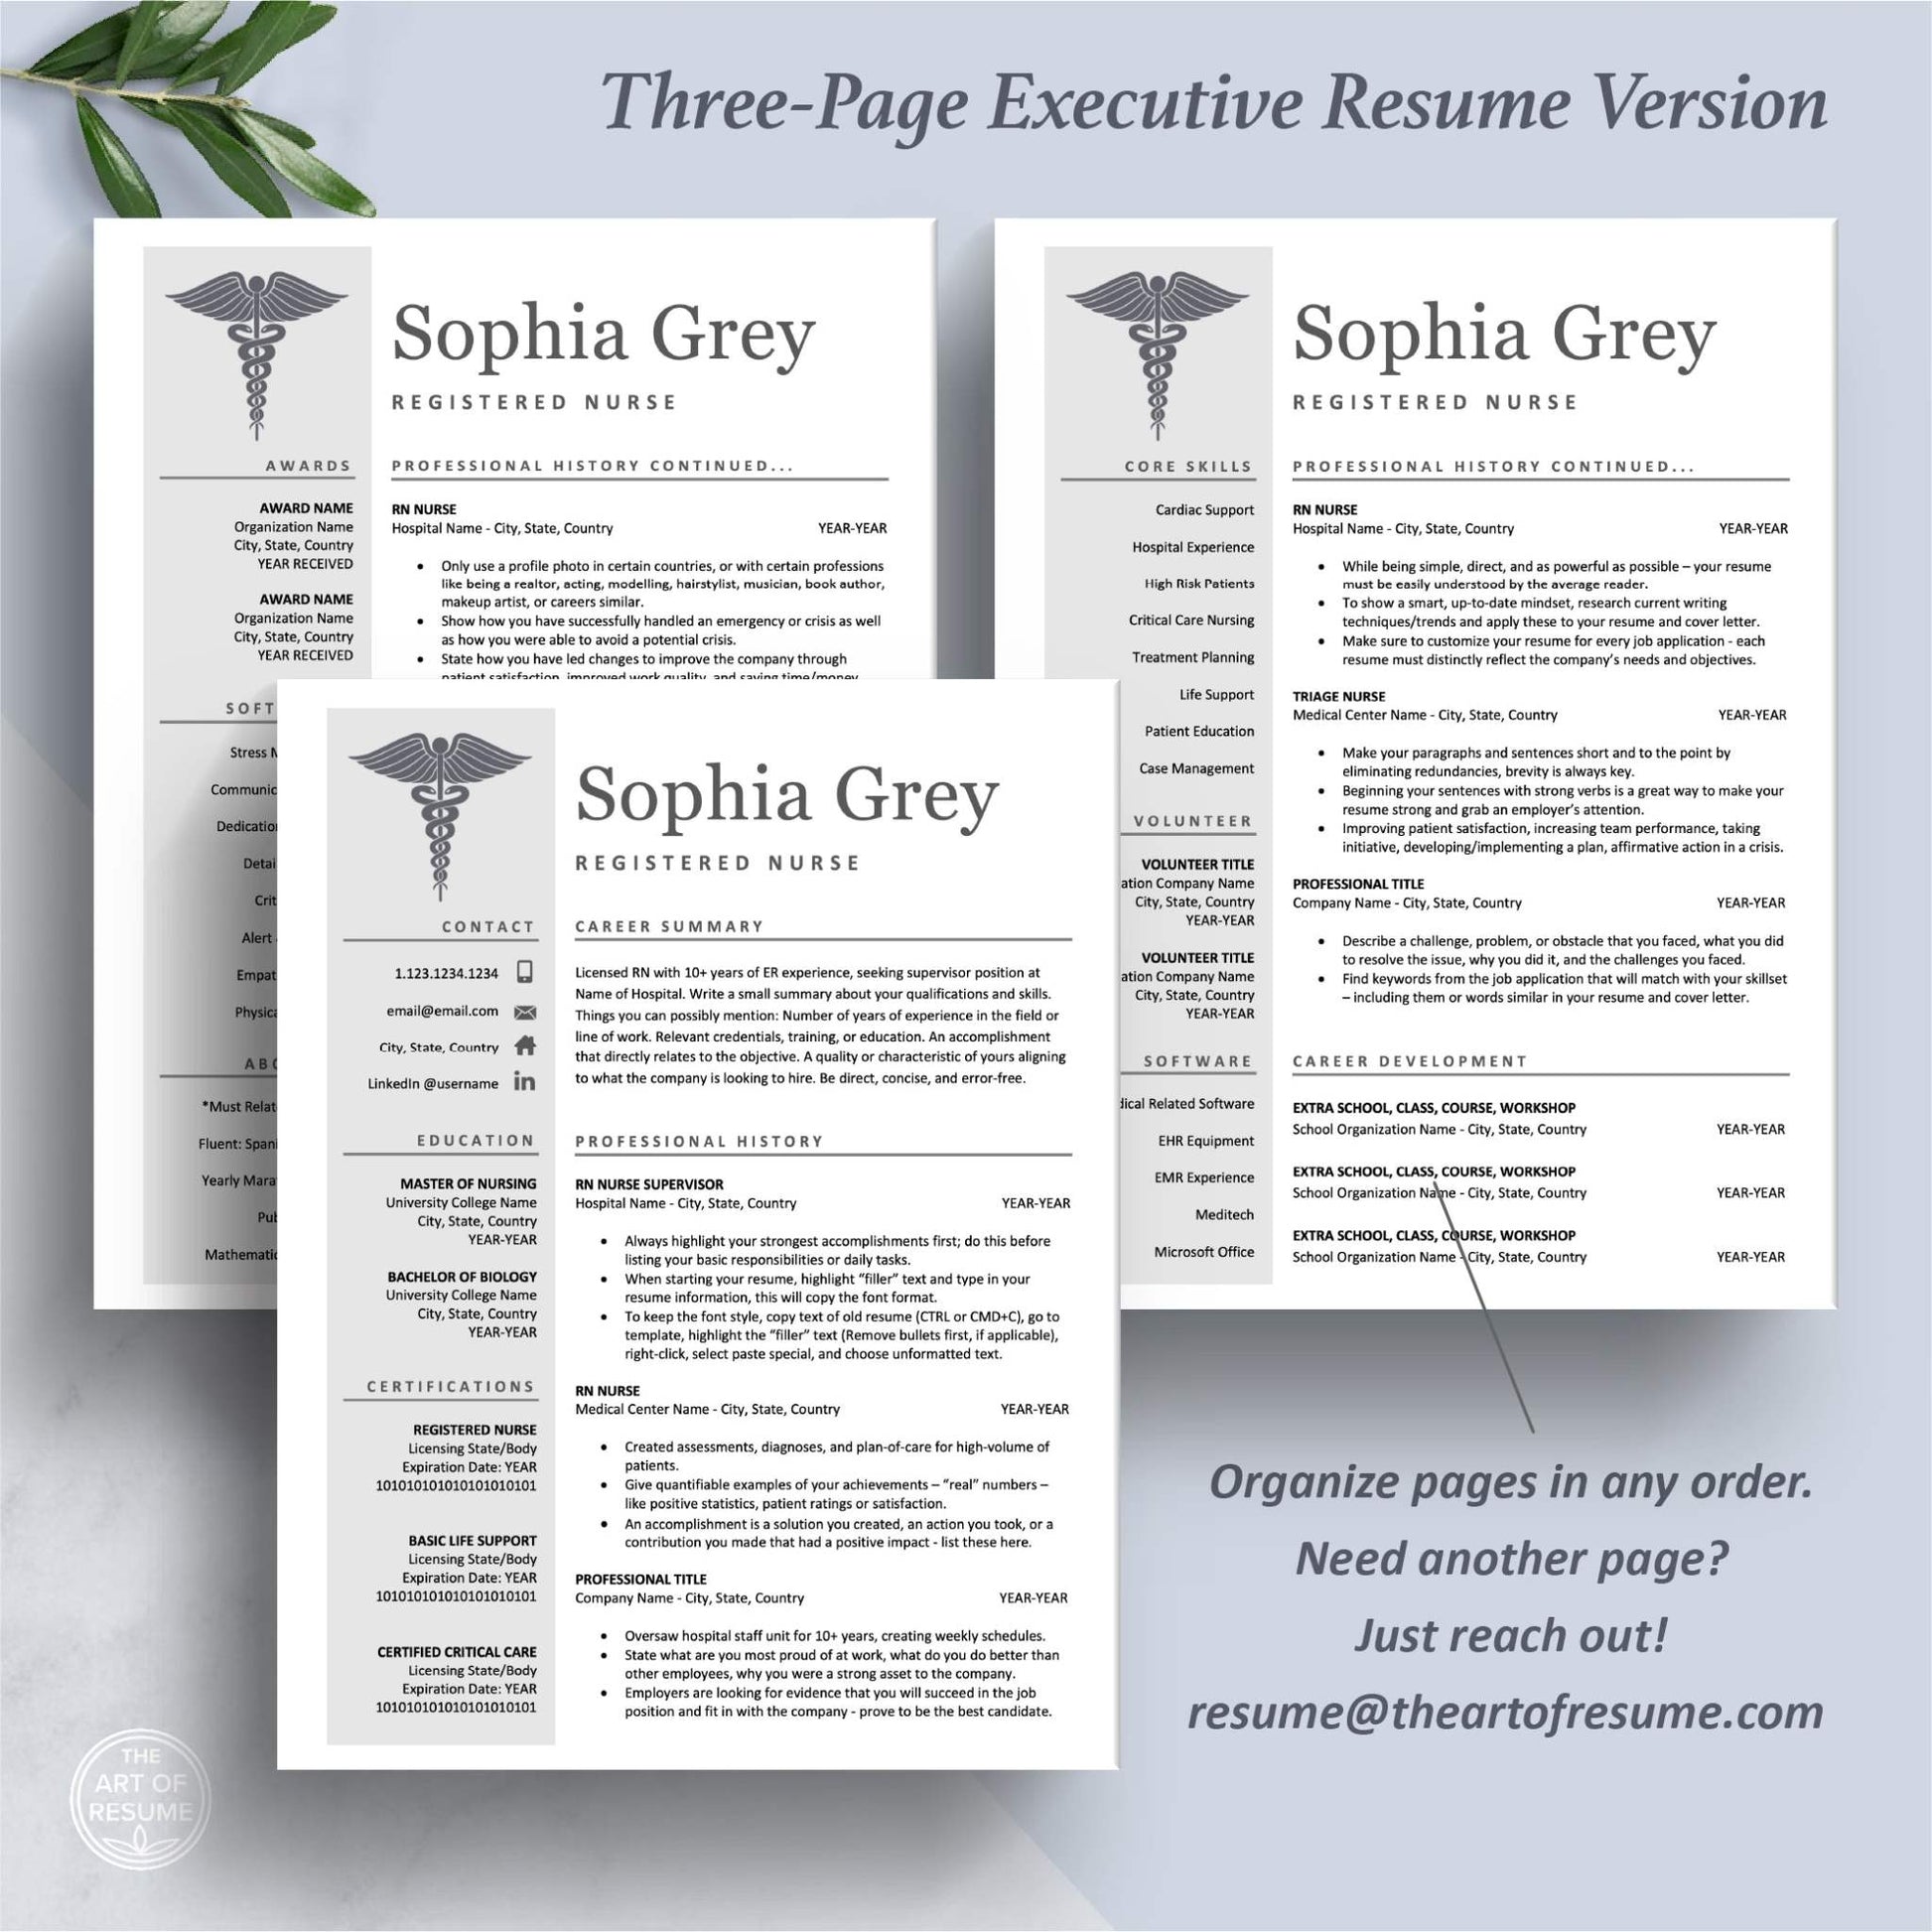 The Art of Resume Templates | Three-Page Medical, Nurse, Doctor Executive C-Suite Level  Resume CV Template Format | Curriculum Vitae